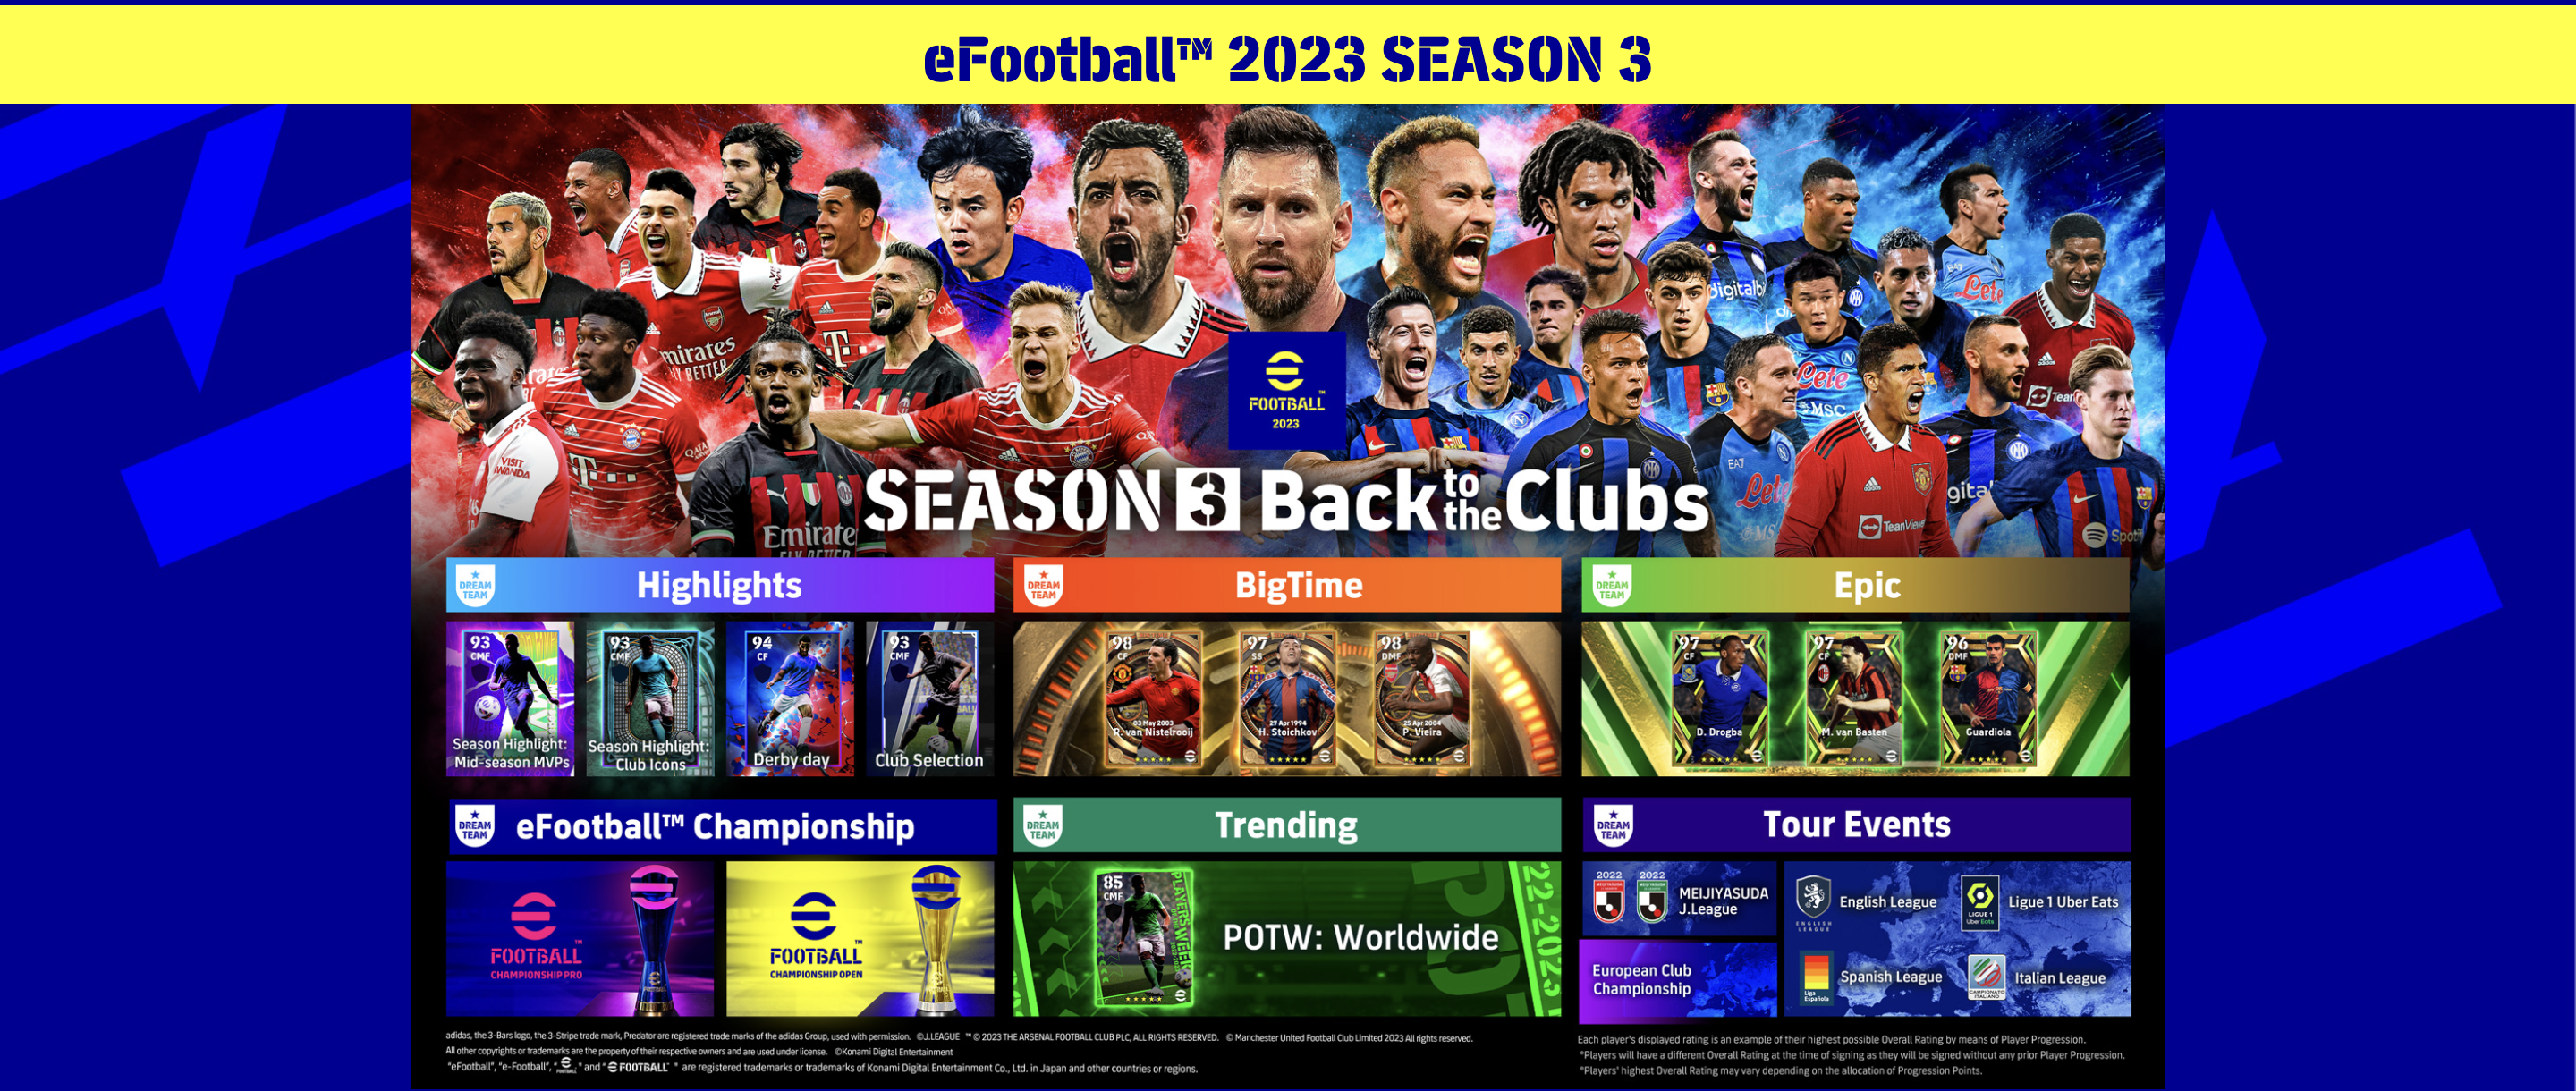 We've released our Winter update for Dream League Soccer 2020